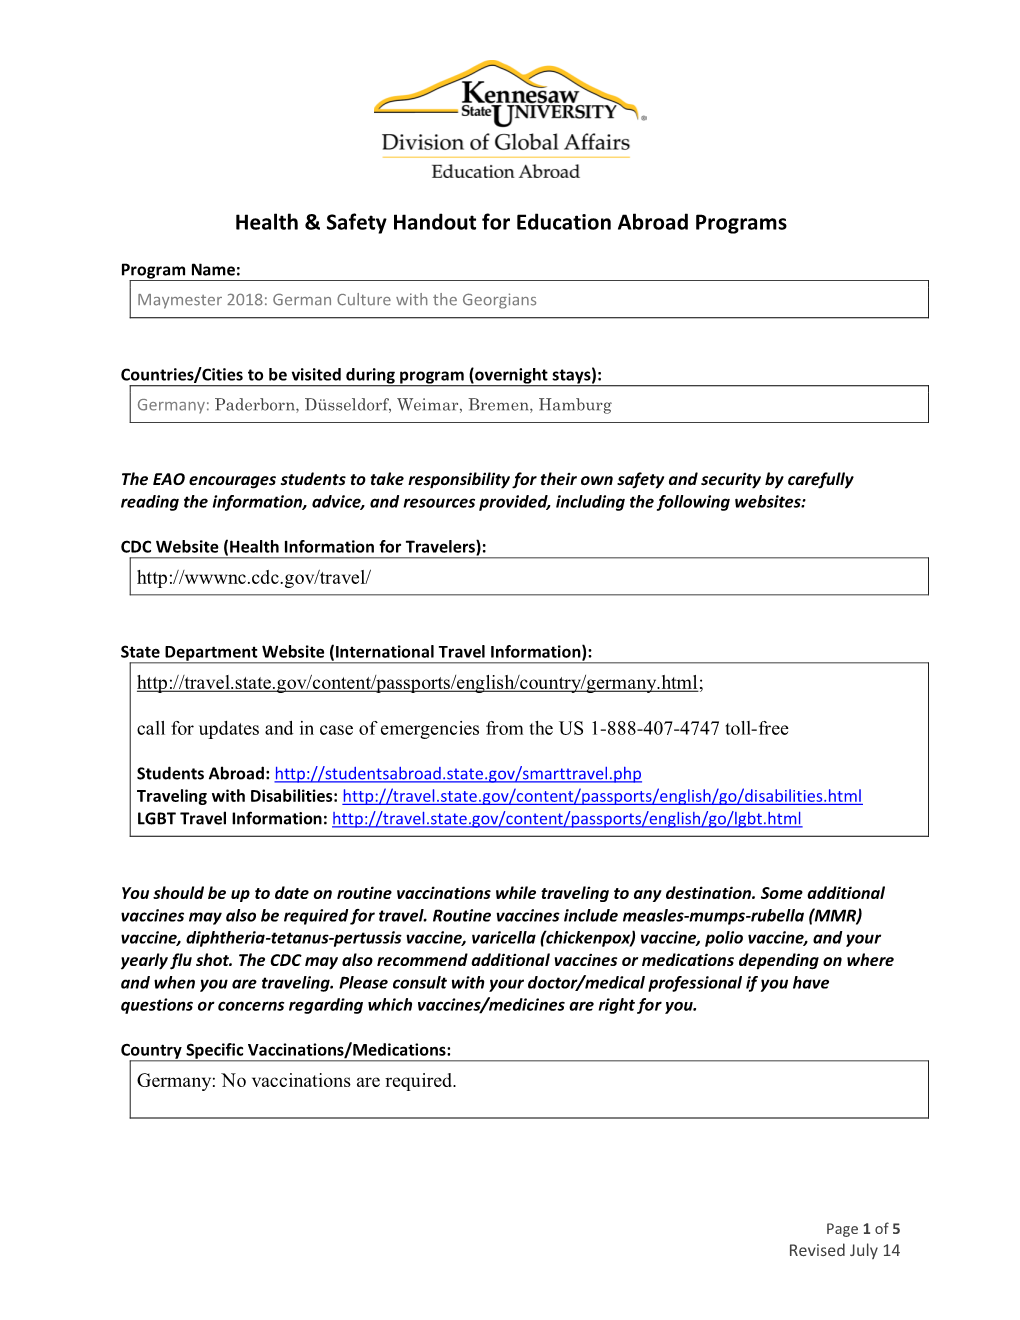 Health & Safety Handout for Education Abroad Programs